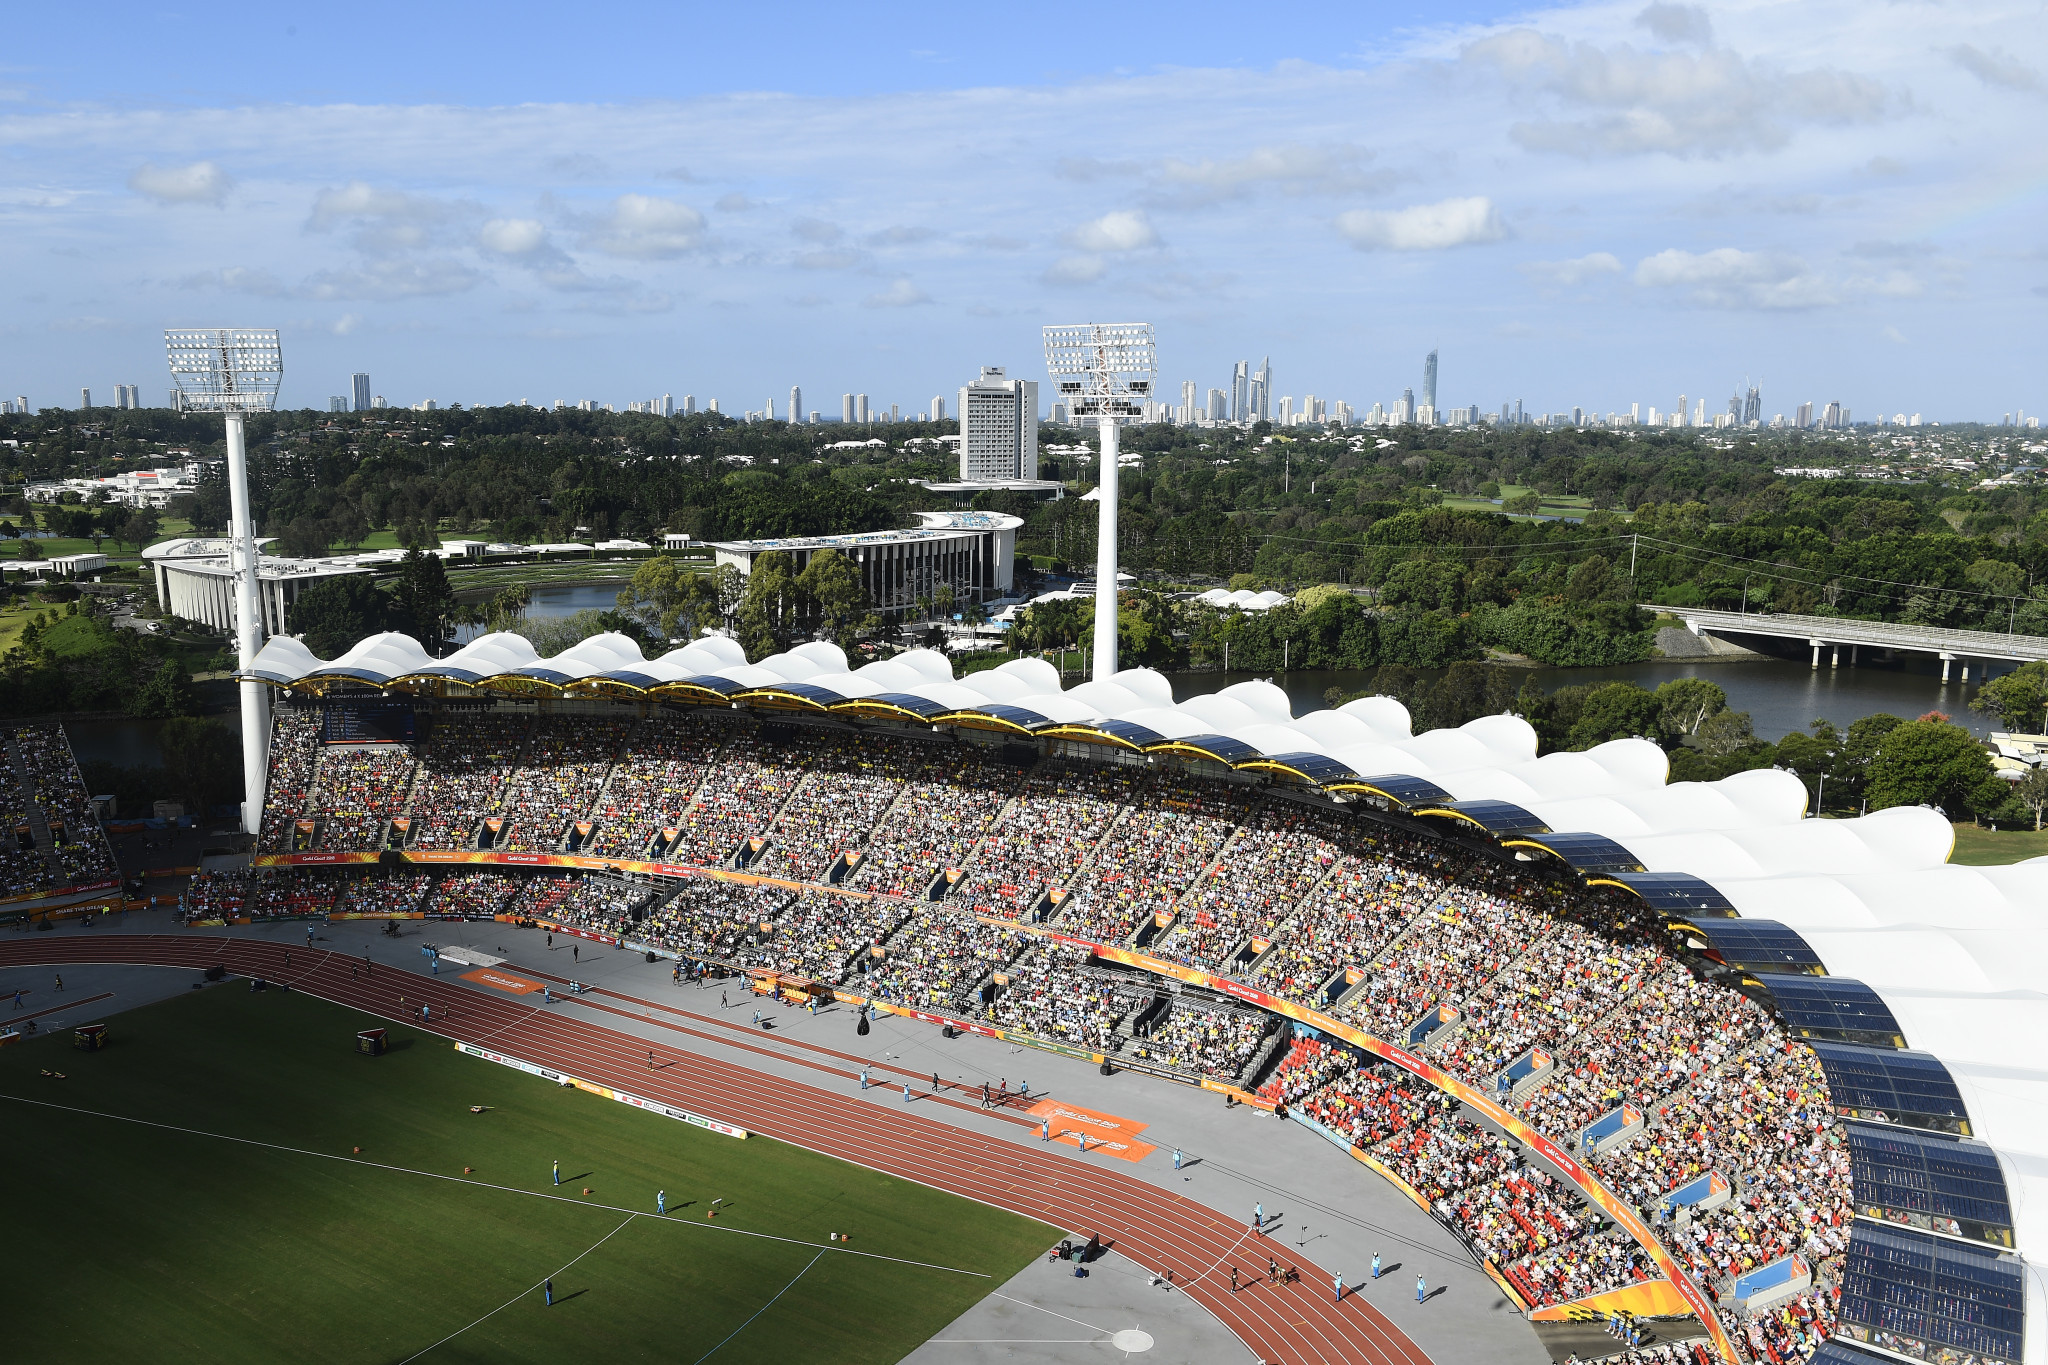 The Carrara Stadium, which hosted athletics, was a popular venue during the 2018 Commonwealth Games in the Gold Coast and has encouraged the city's Mayor Tom Tate to launch a bid for the IAAF World Championships ©Getty Images